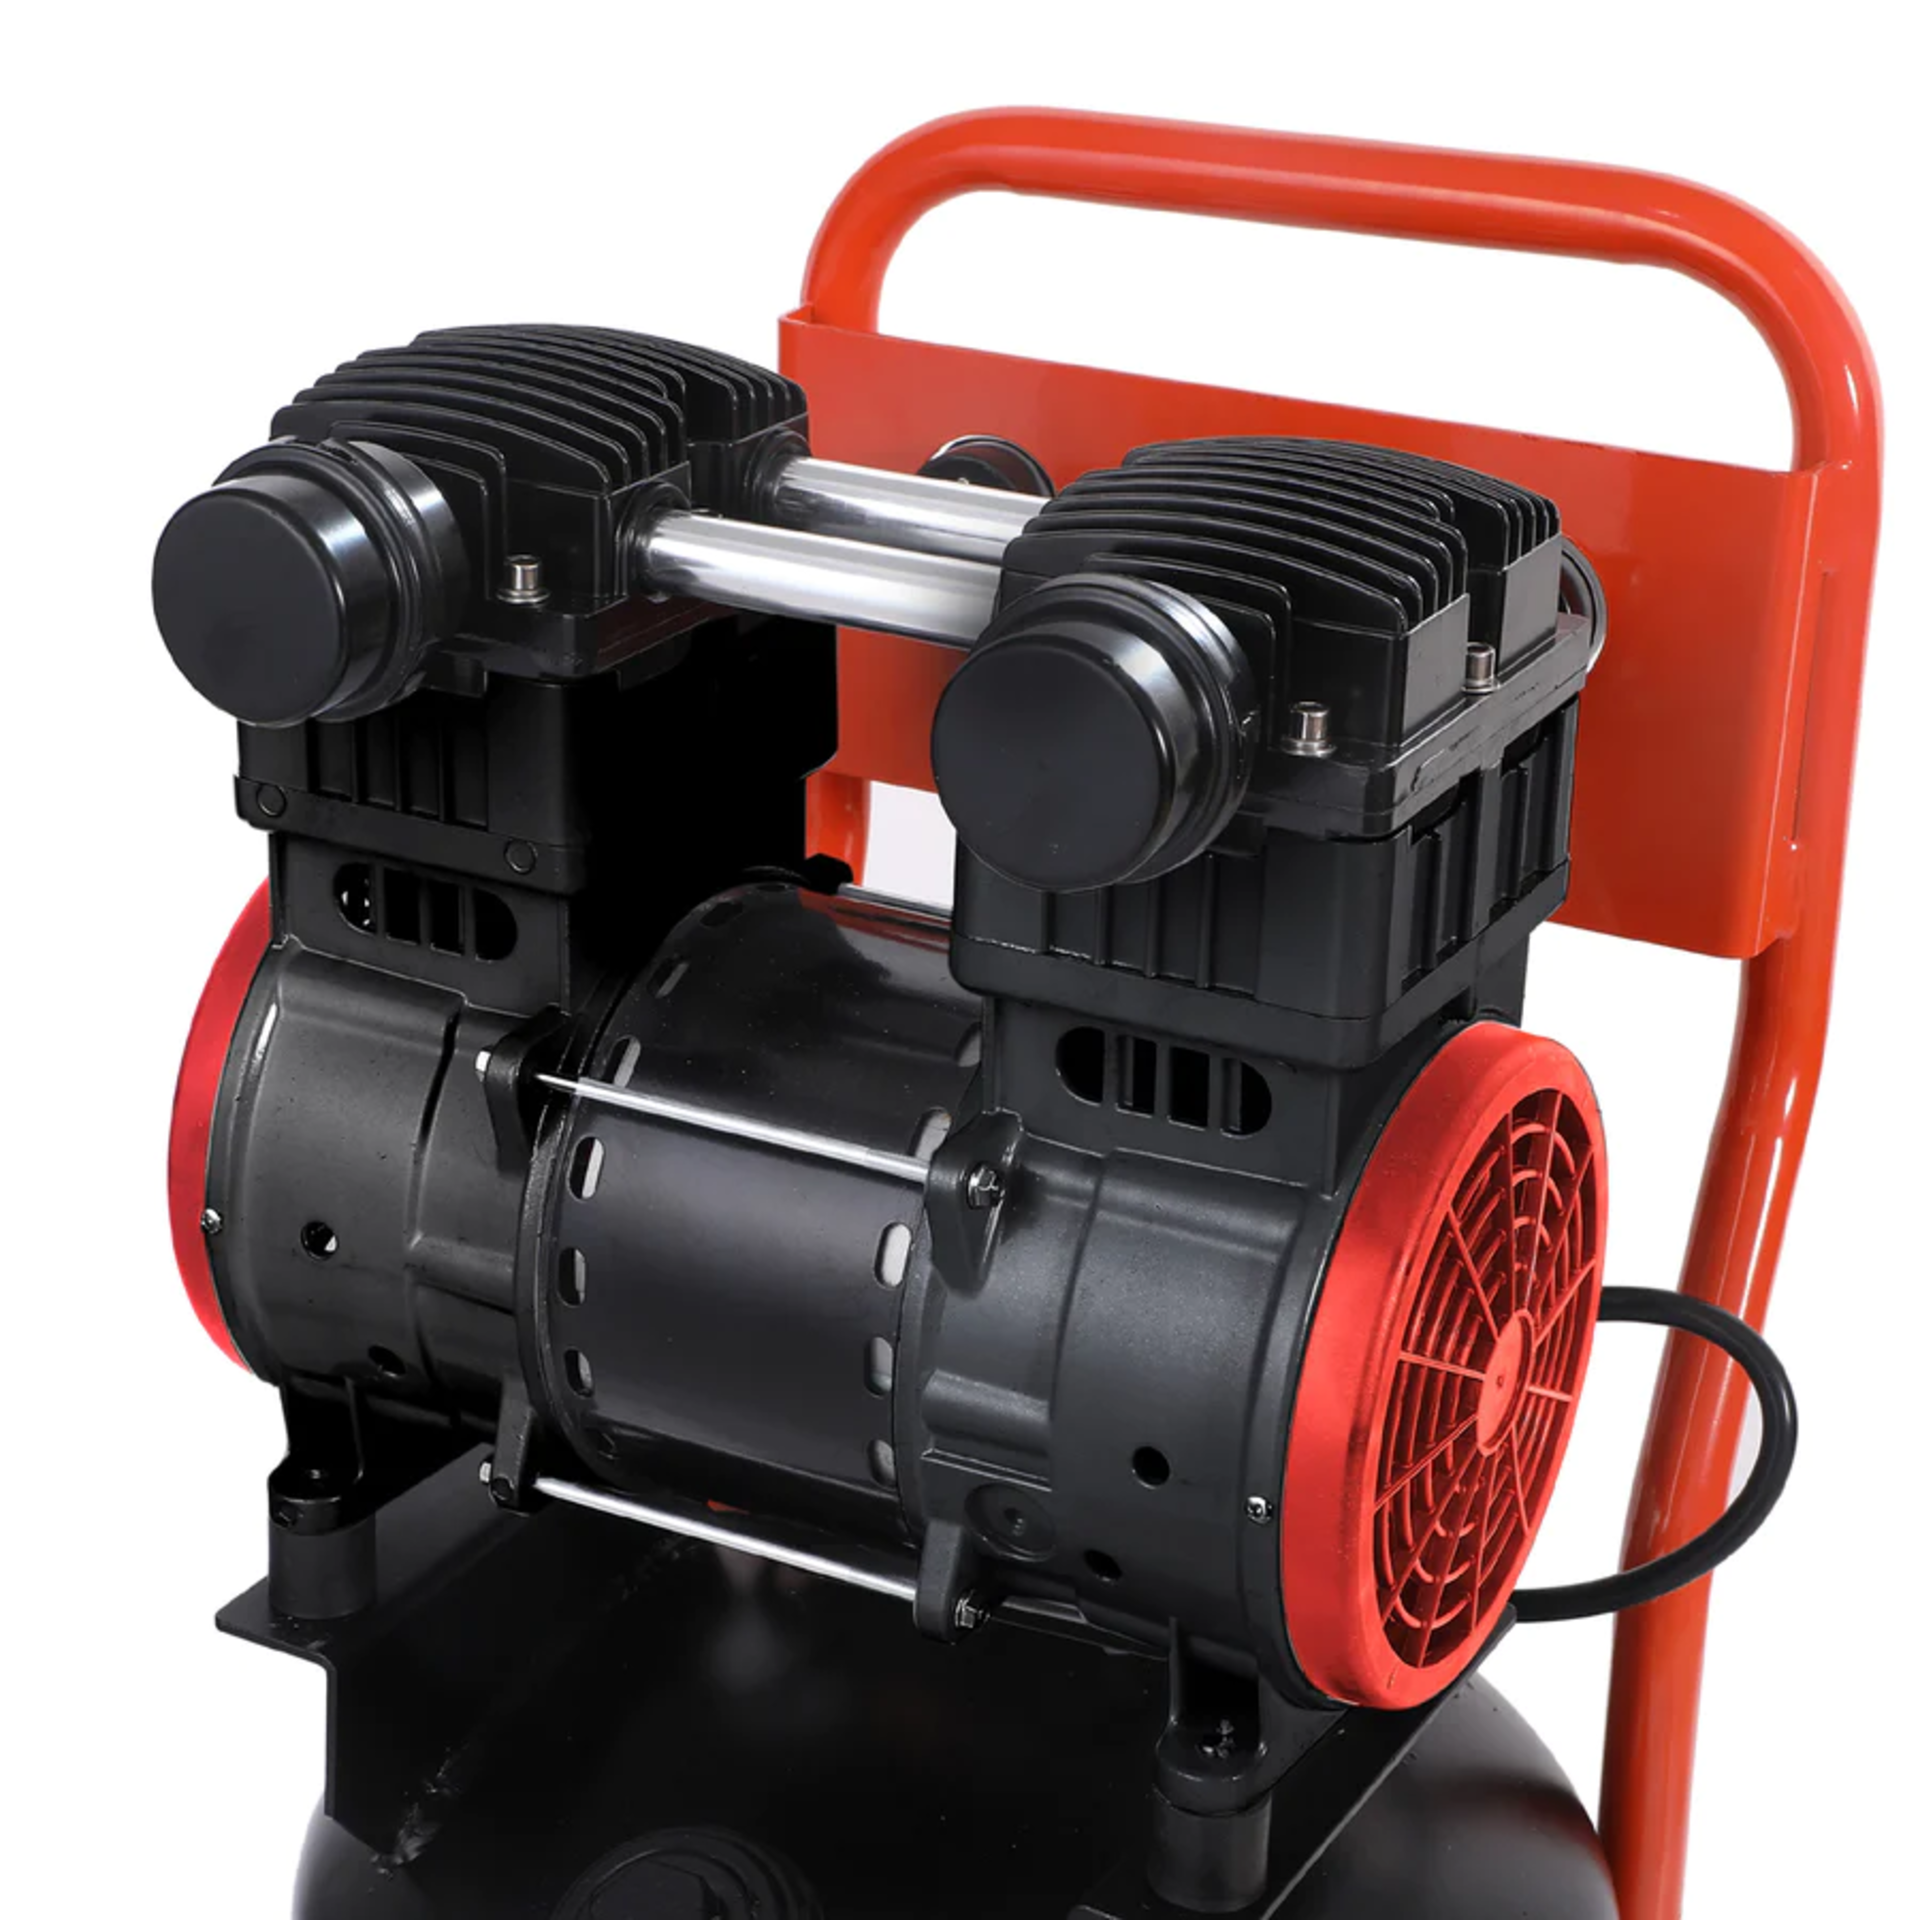 TMG-ACE25 PORTABLE ELECTRIC AIR COMPRESSOR-2HP 25G TMG-ACE25 PORTABLE ELECTRIC AIR COMPRESSOR-2HP - Image 7 of 9